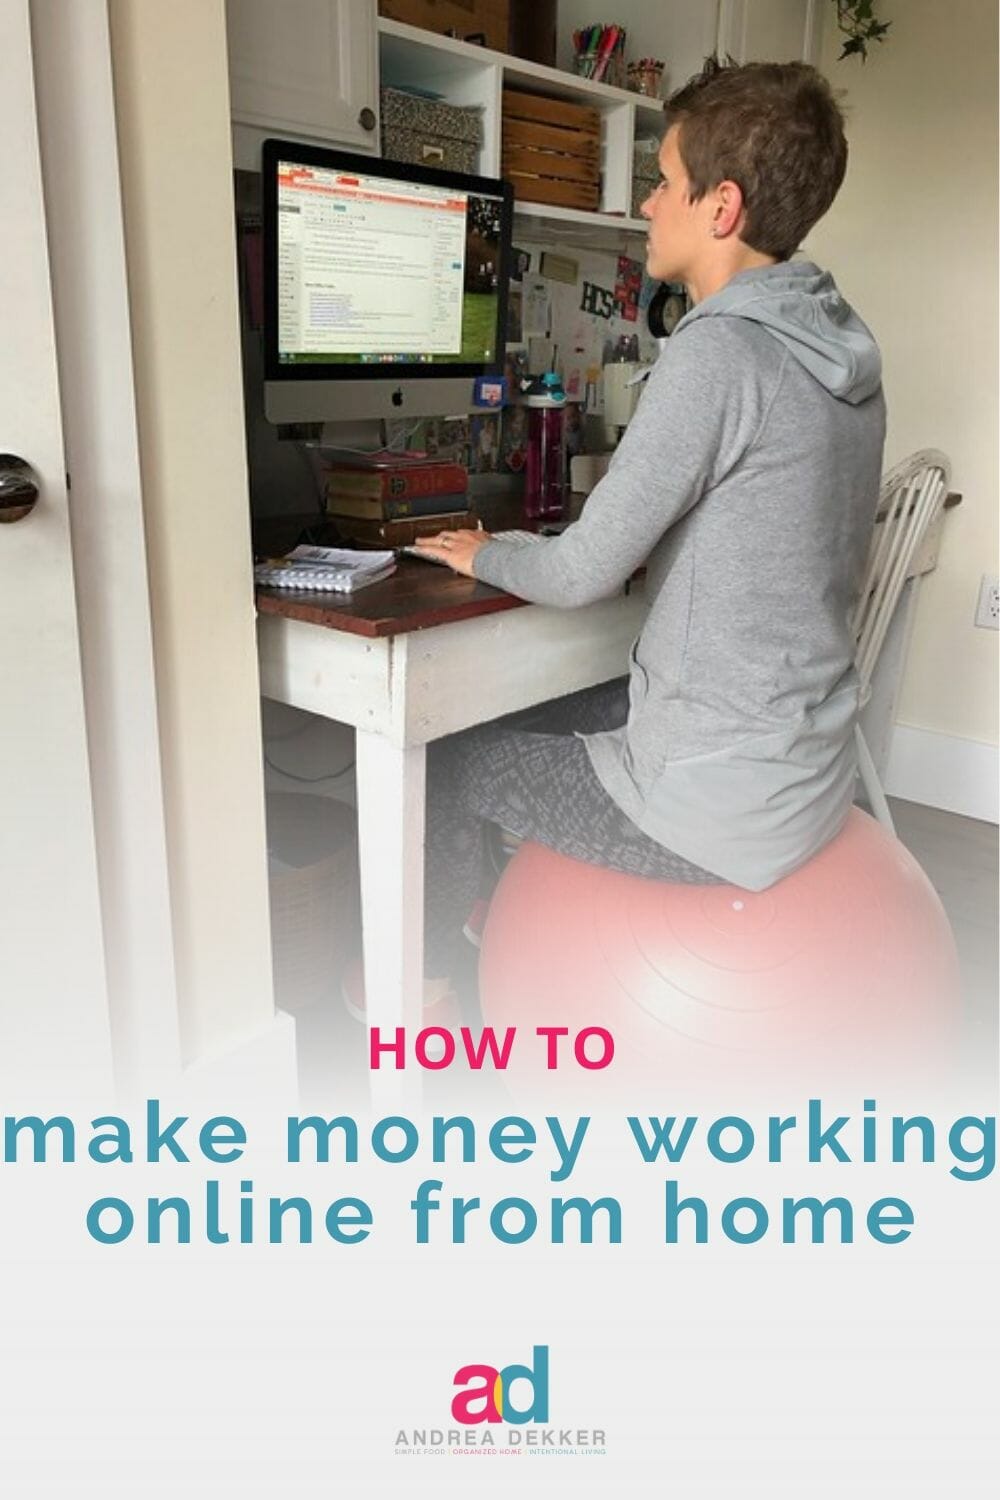 The online world has huge income potential. If you've ever wondered how to make money working online from home, this post is sure to be a helpful resource! Read more about my work-from-home journey over the last 13 years, as well as some of my favorite resources to help YOU make money working online! via @andreadekker